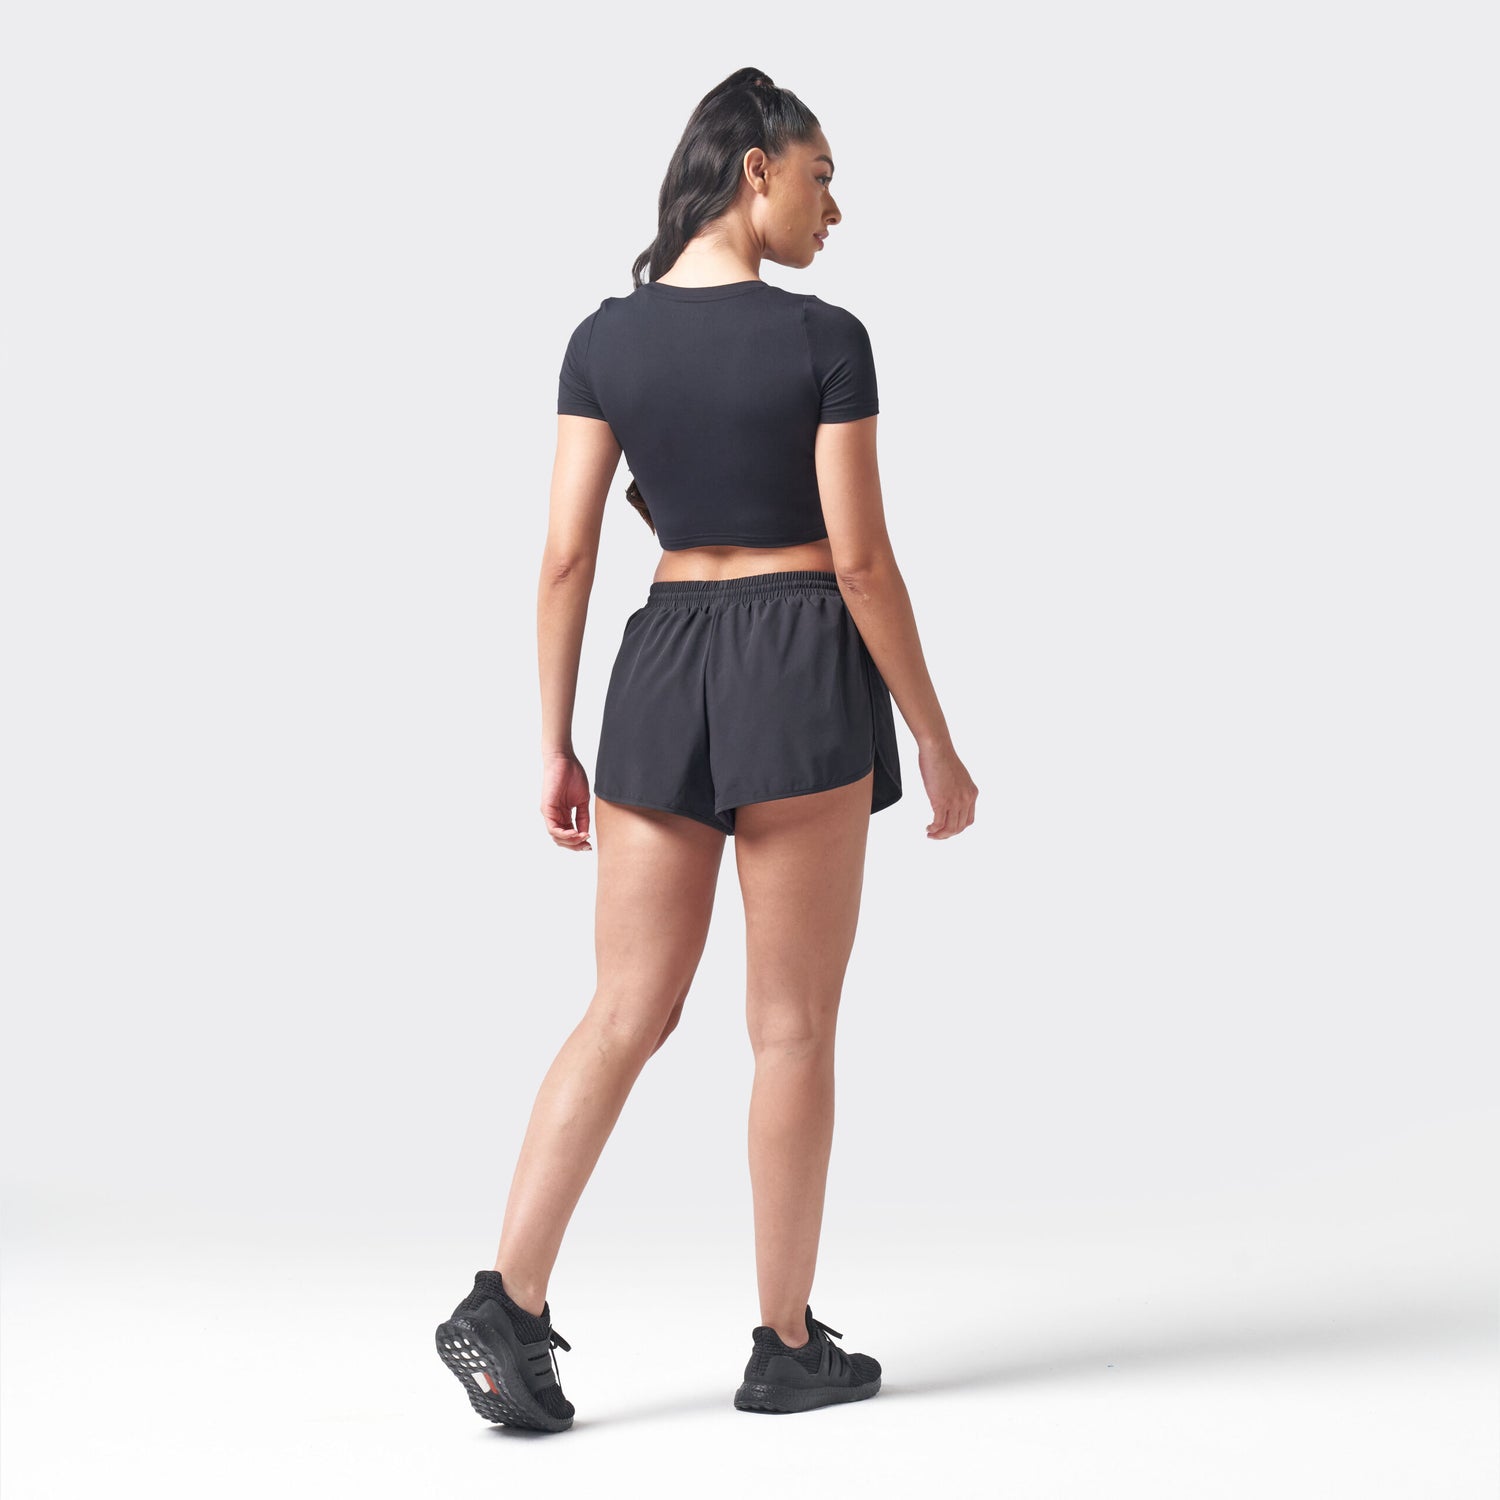 squatwolf-gym-wear-essential-cropped-tee-black-workout-tee-for-women